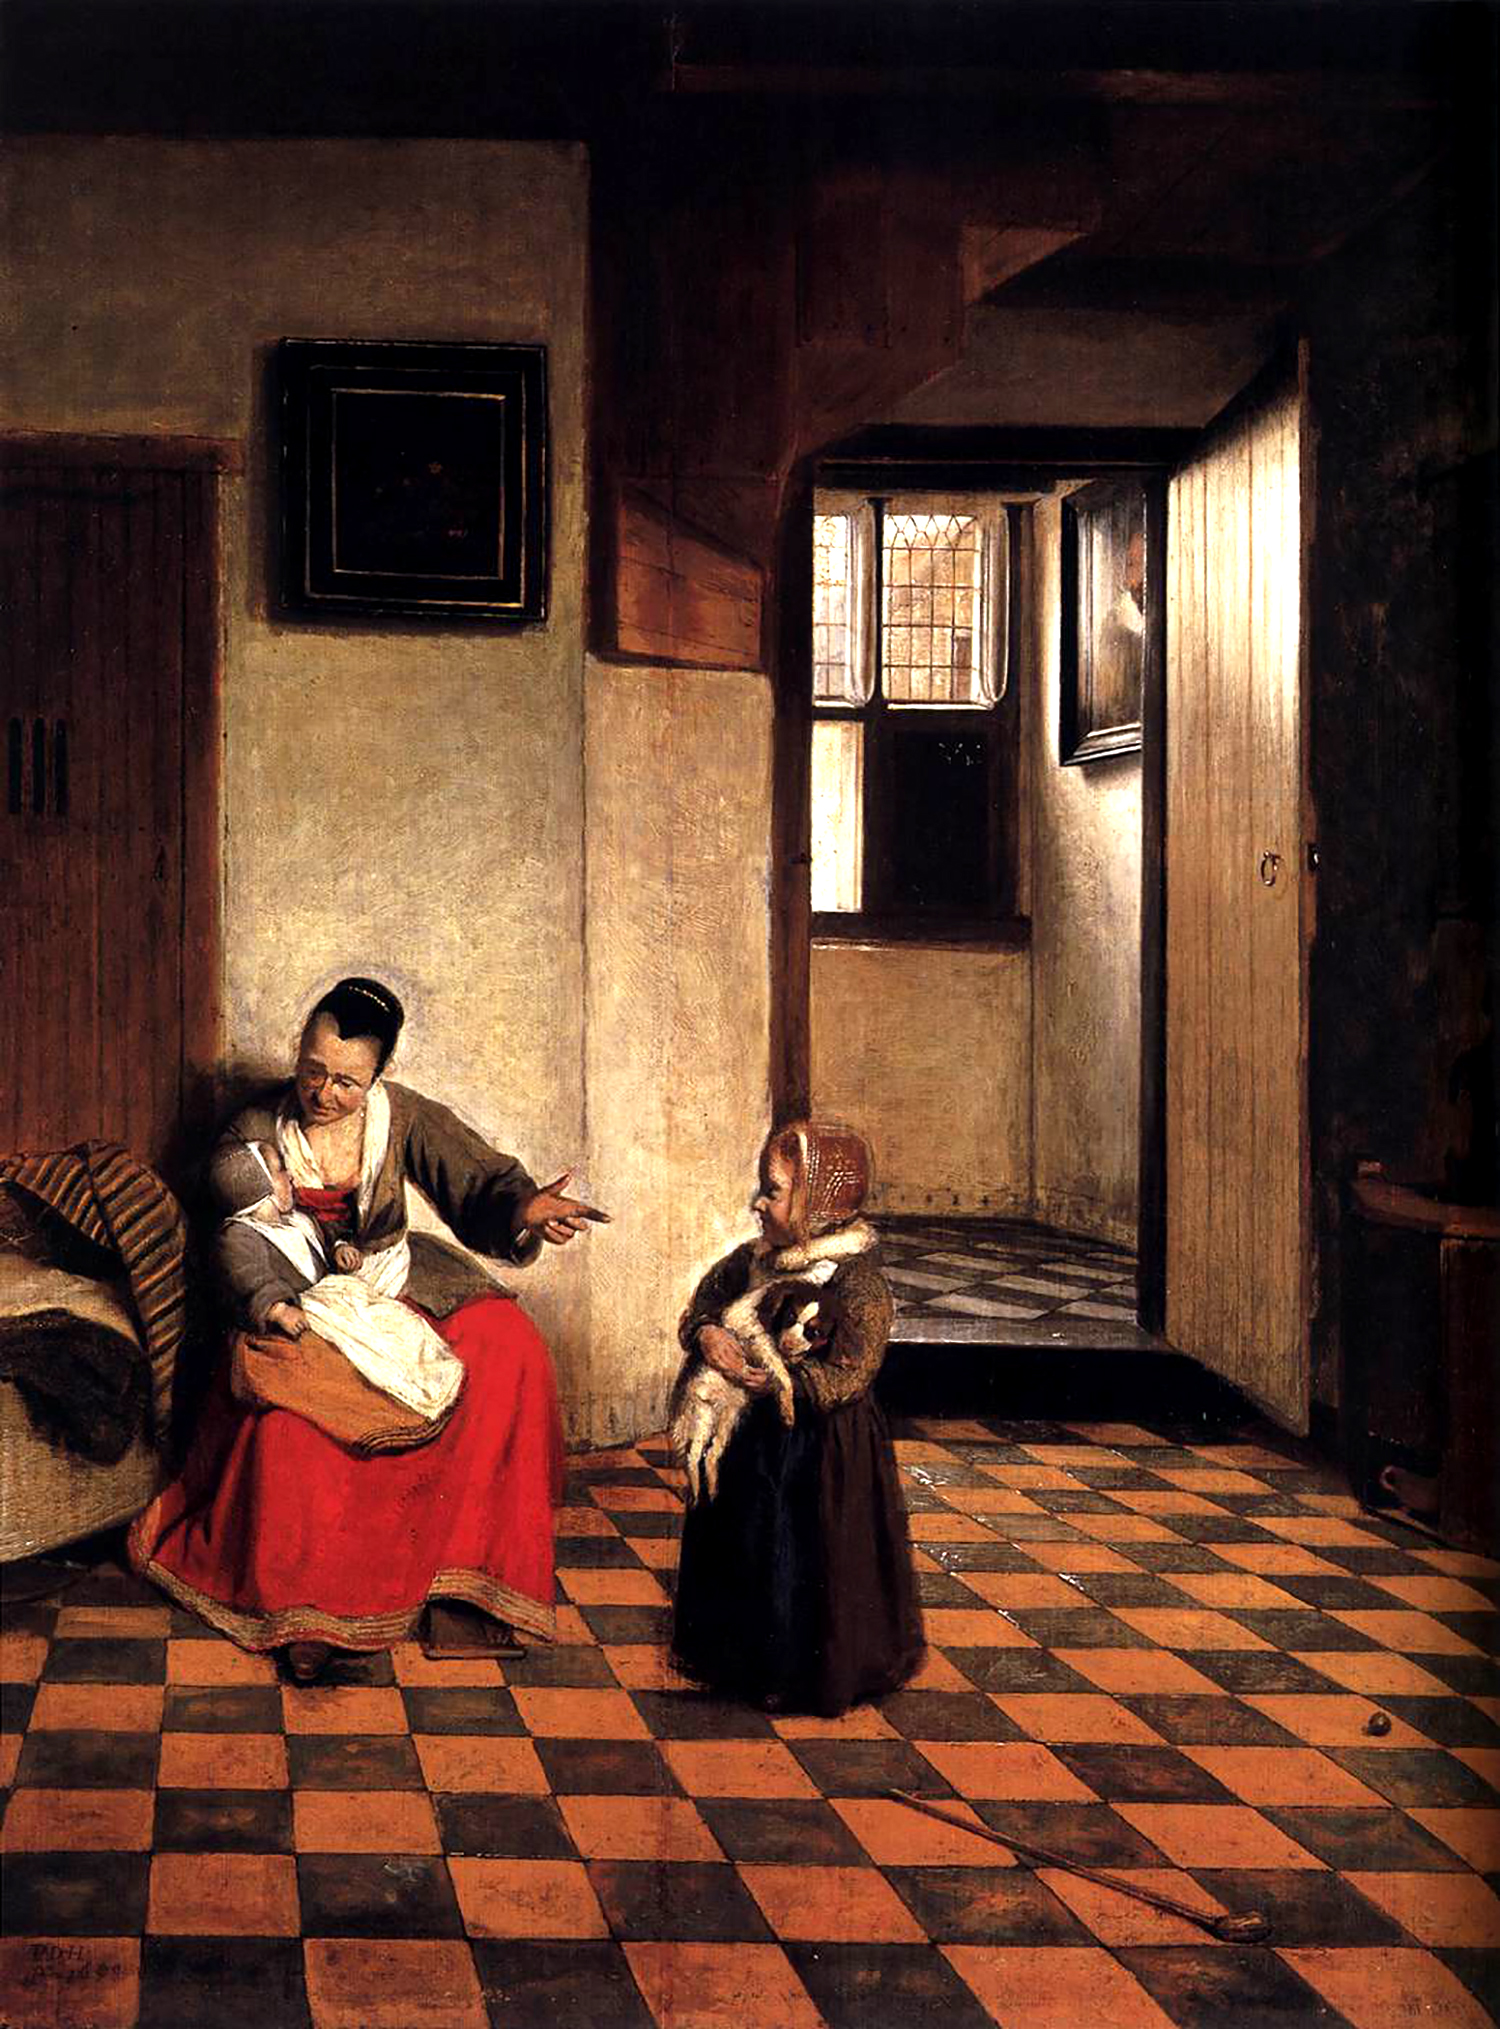 Pieter de Hooch - A woman with a baby in her lap and a small child - 1658.jpg